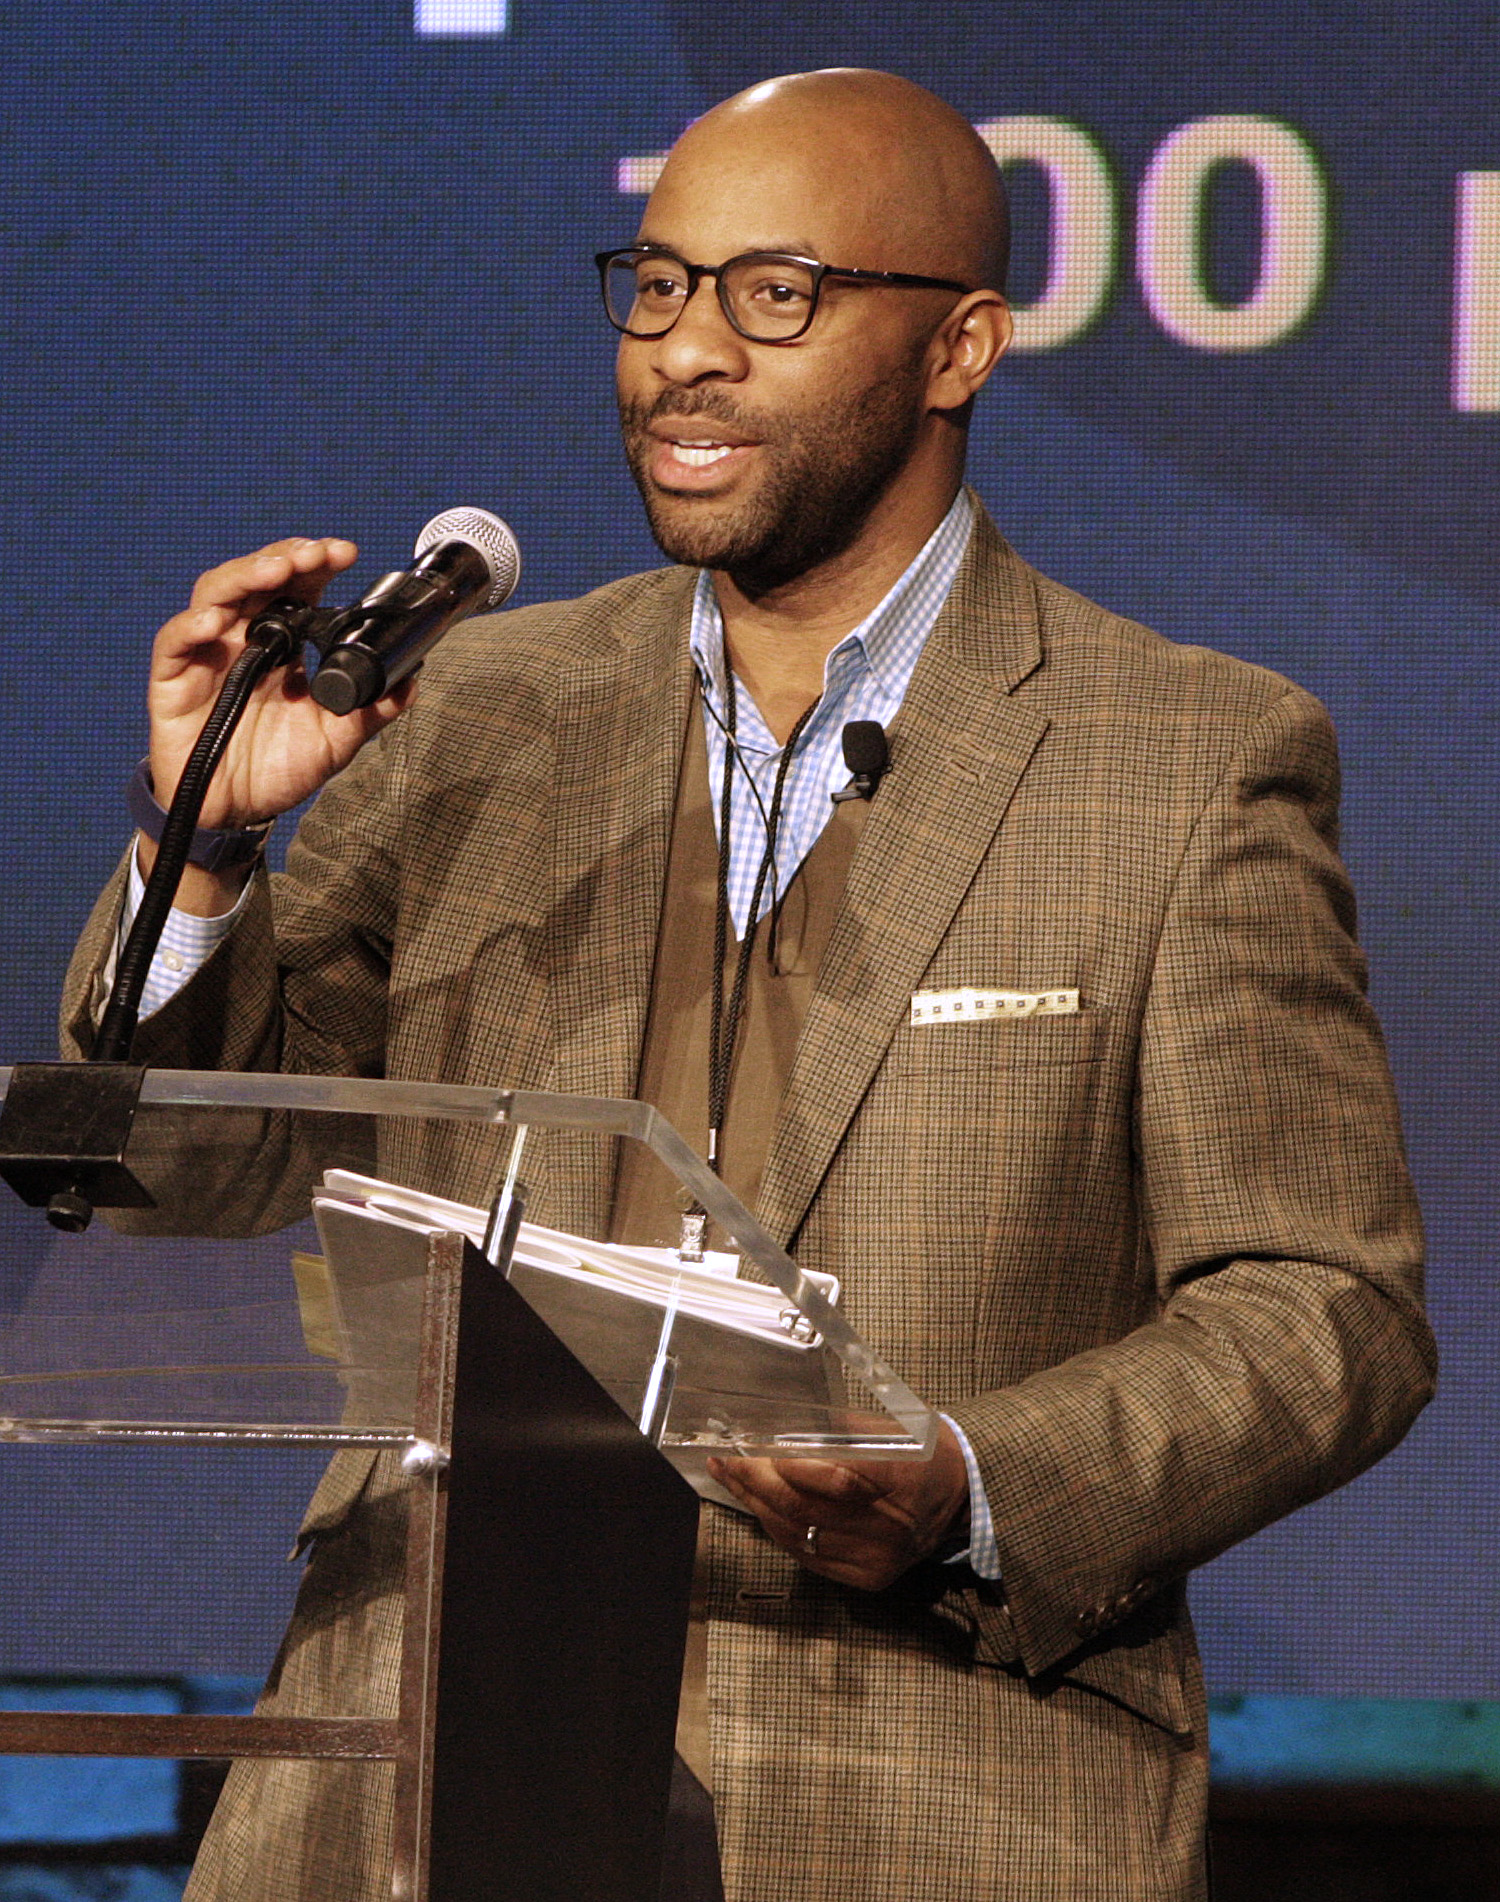 The Rev. Olu Brown, pastor of Impact Church, was host for the Uniting Methodist Conference. Photo by Kathy L. Gilbert, UMNS.